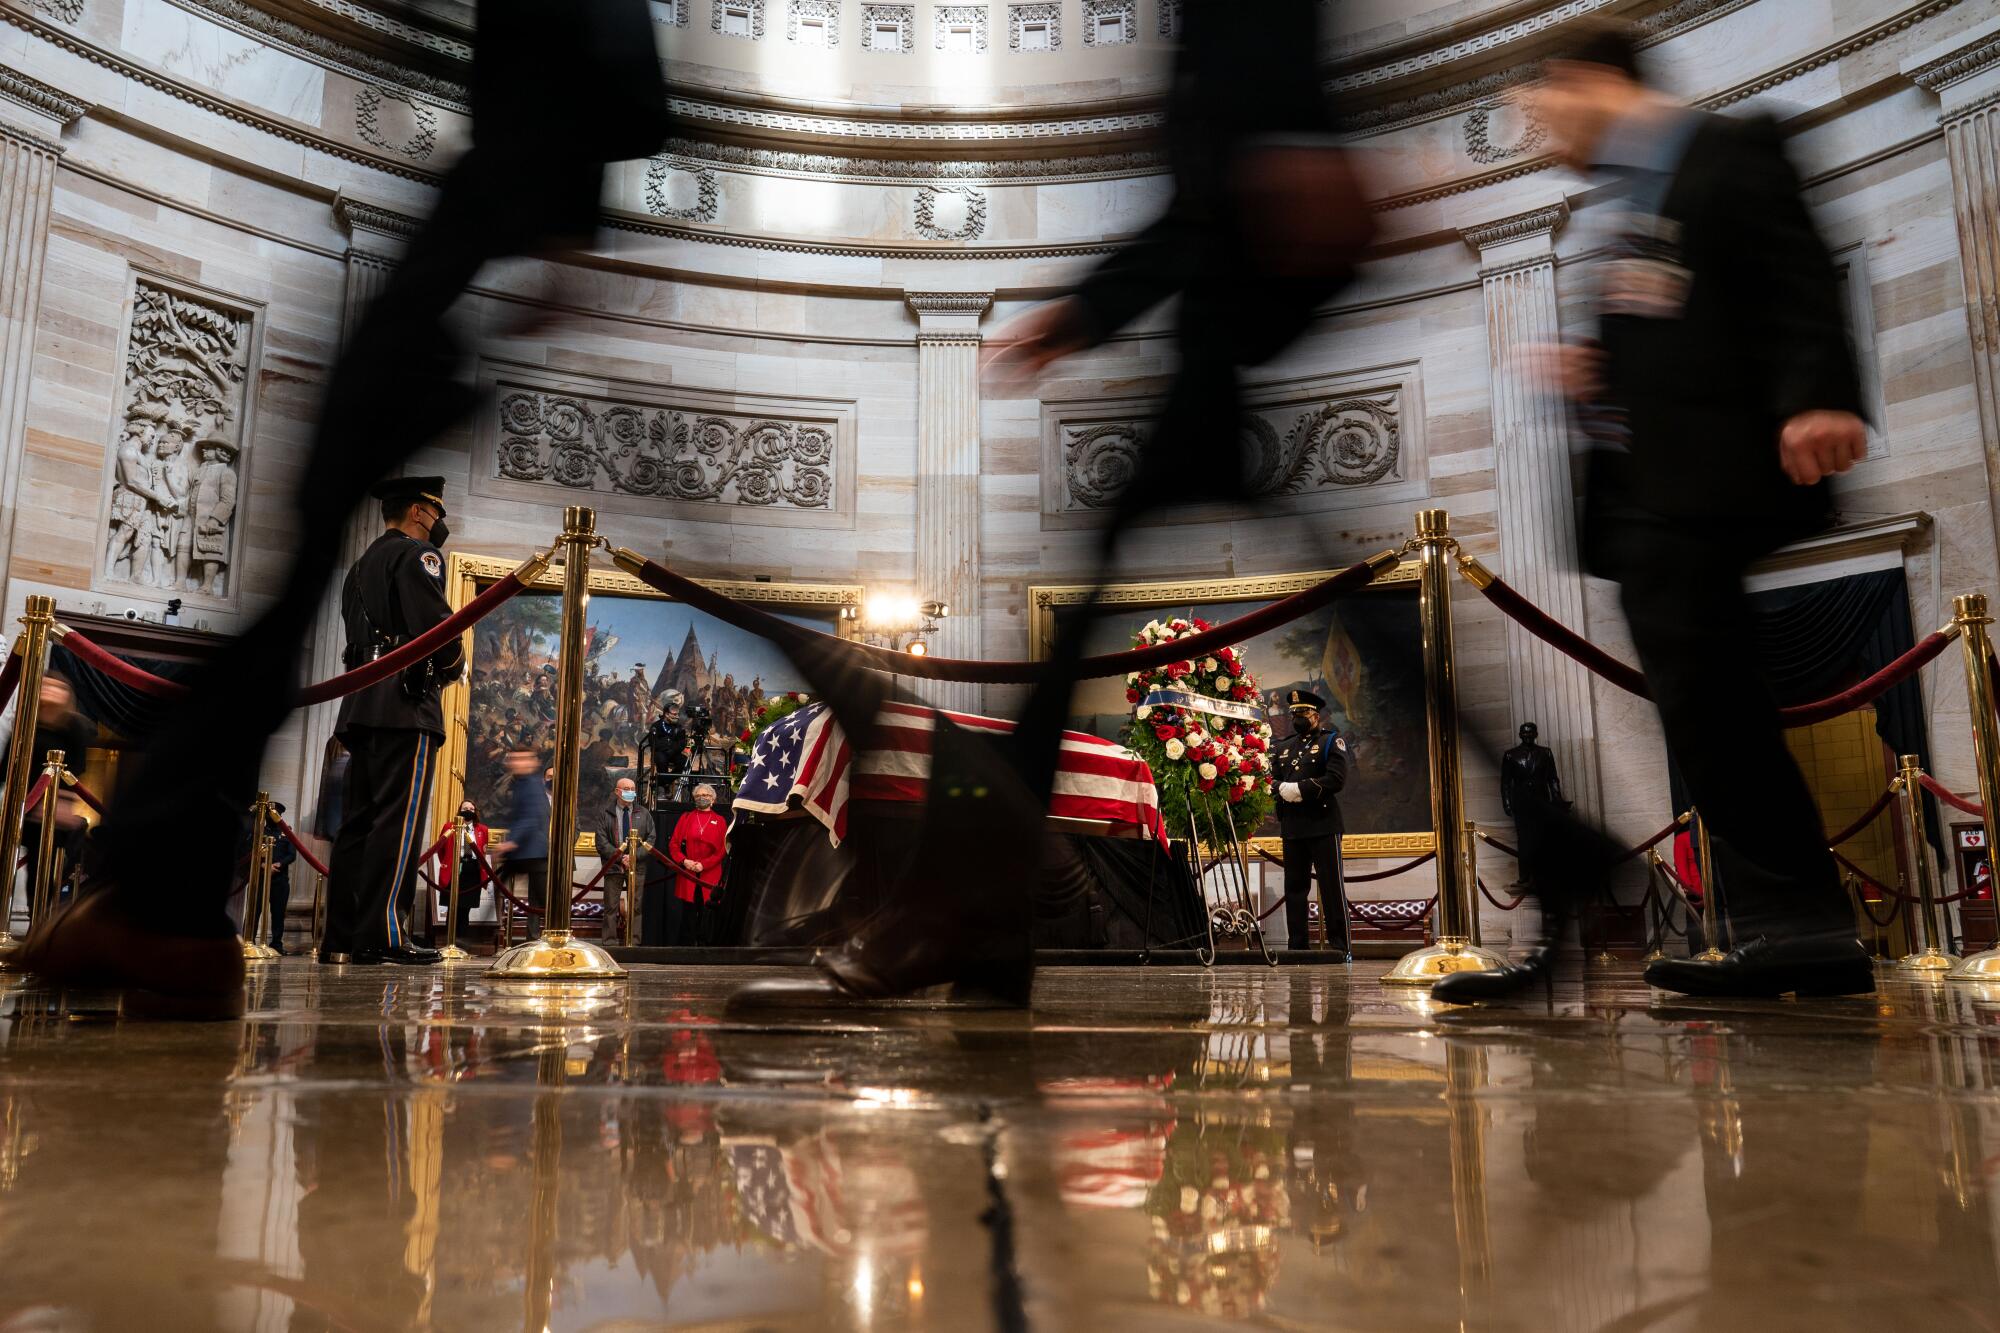 Bob Dole's casket in the U.S. Capitol Rotunda as he lies in state on Thursday.